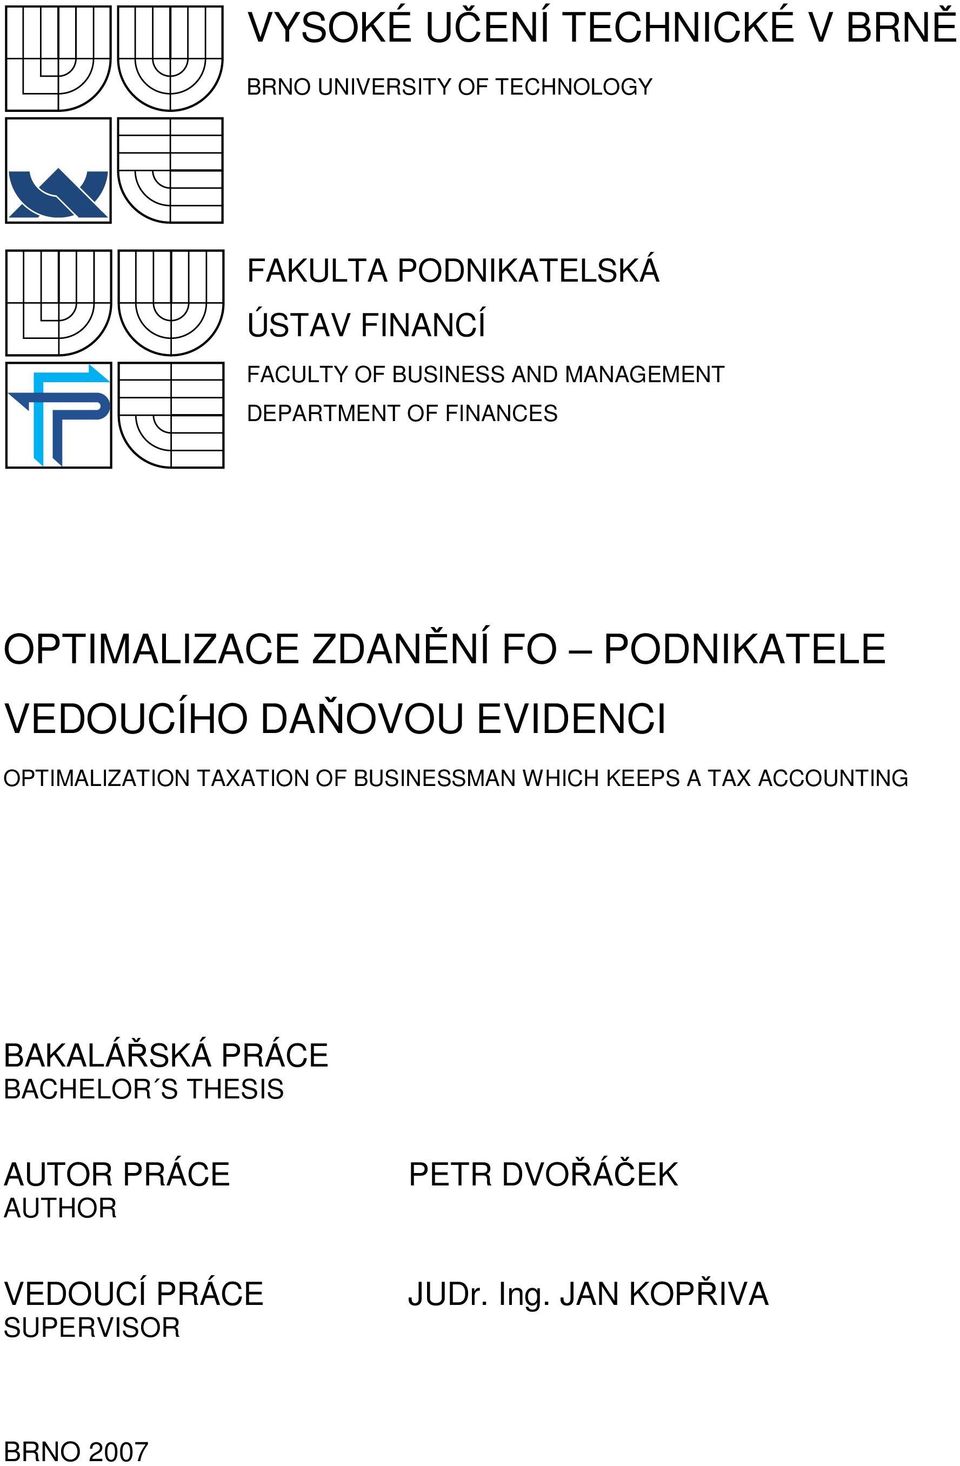 VEDOUCÍHO DAŇOVOU EVIDENCI OPTIMALIZATION TAXATION OF BUSINESSMAN WHICH KEEPS A TAX ACCOUNTING